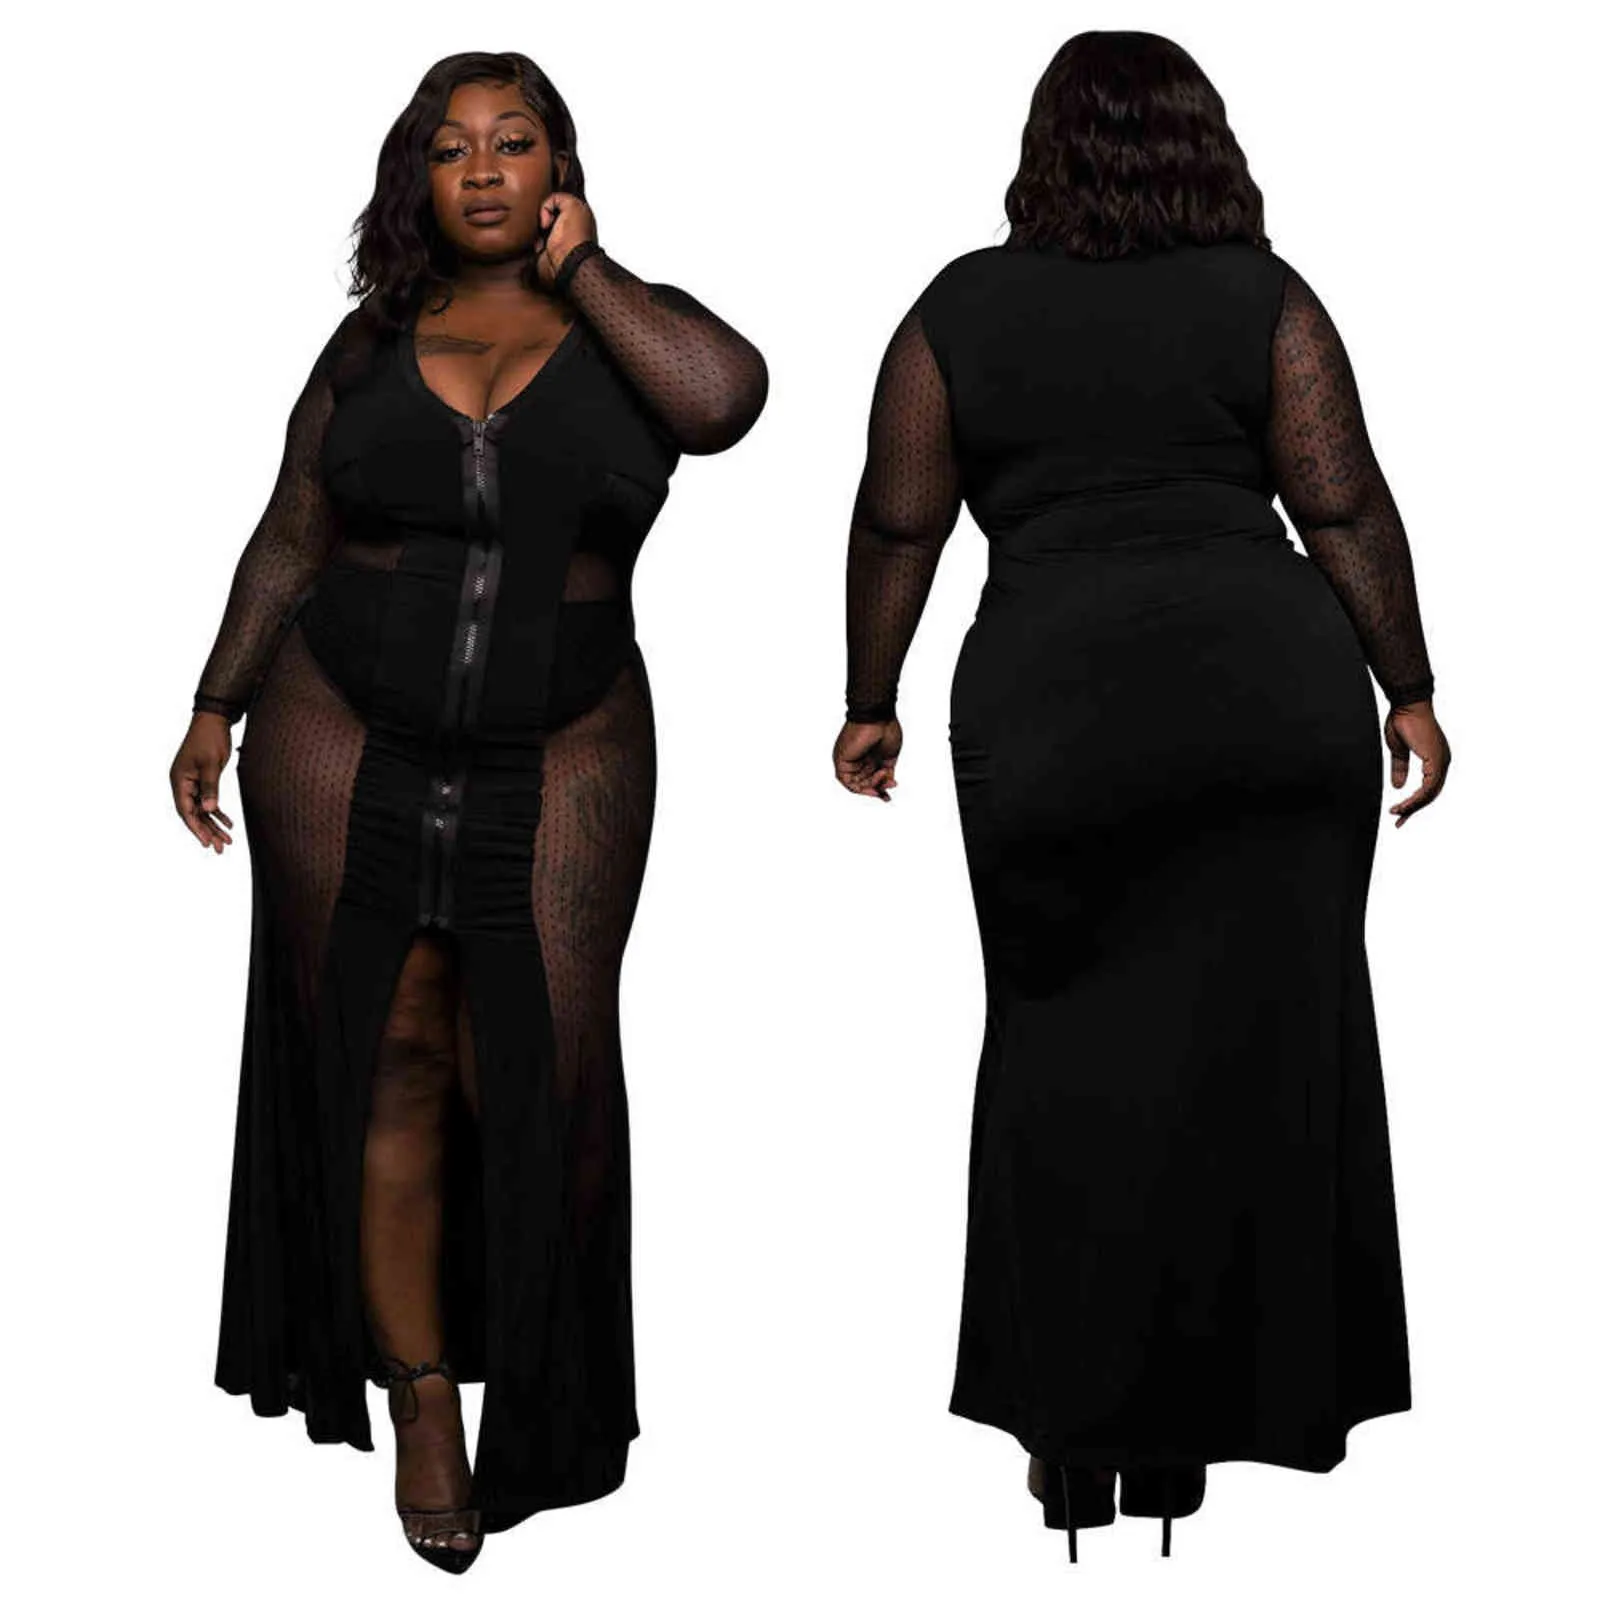 Sexy Long Mesh Sheer Dress Women See Through Full Sleeve V Neck Club Maxi Dresses  Transparent Evening Outfit Plus Size 5XL Black 211116 From Kua01, $17.32